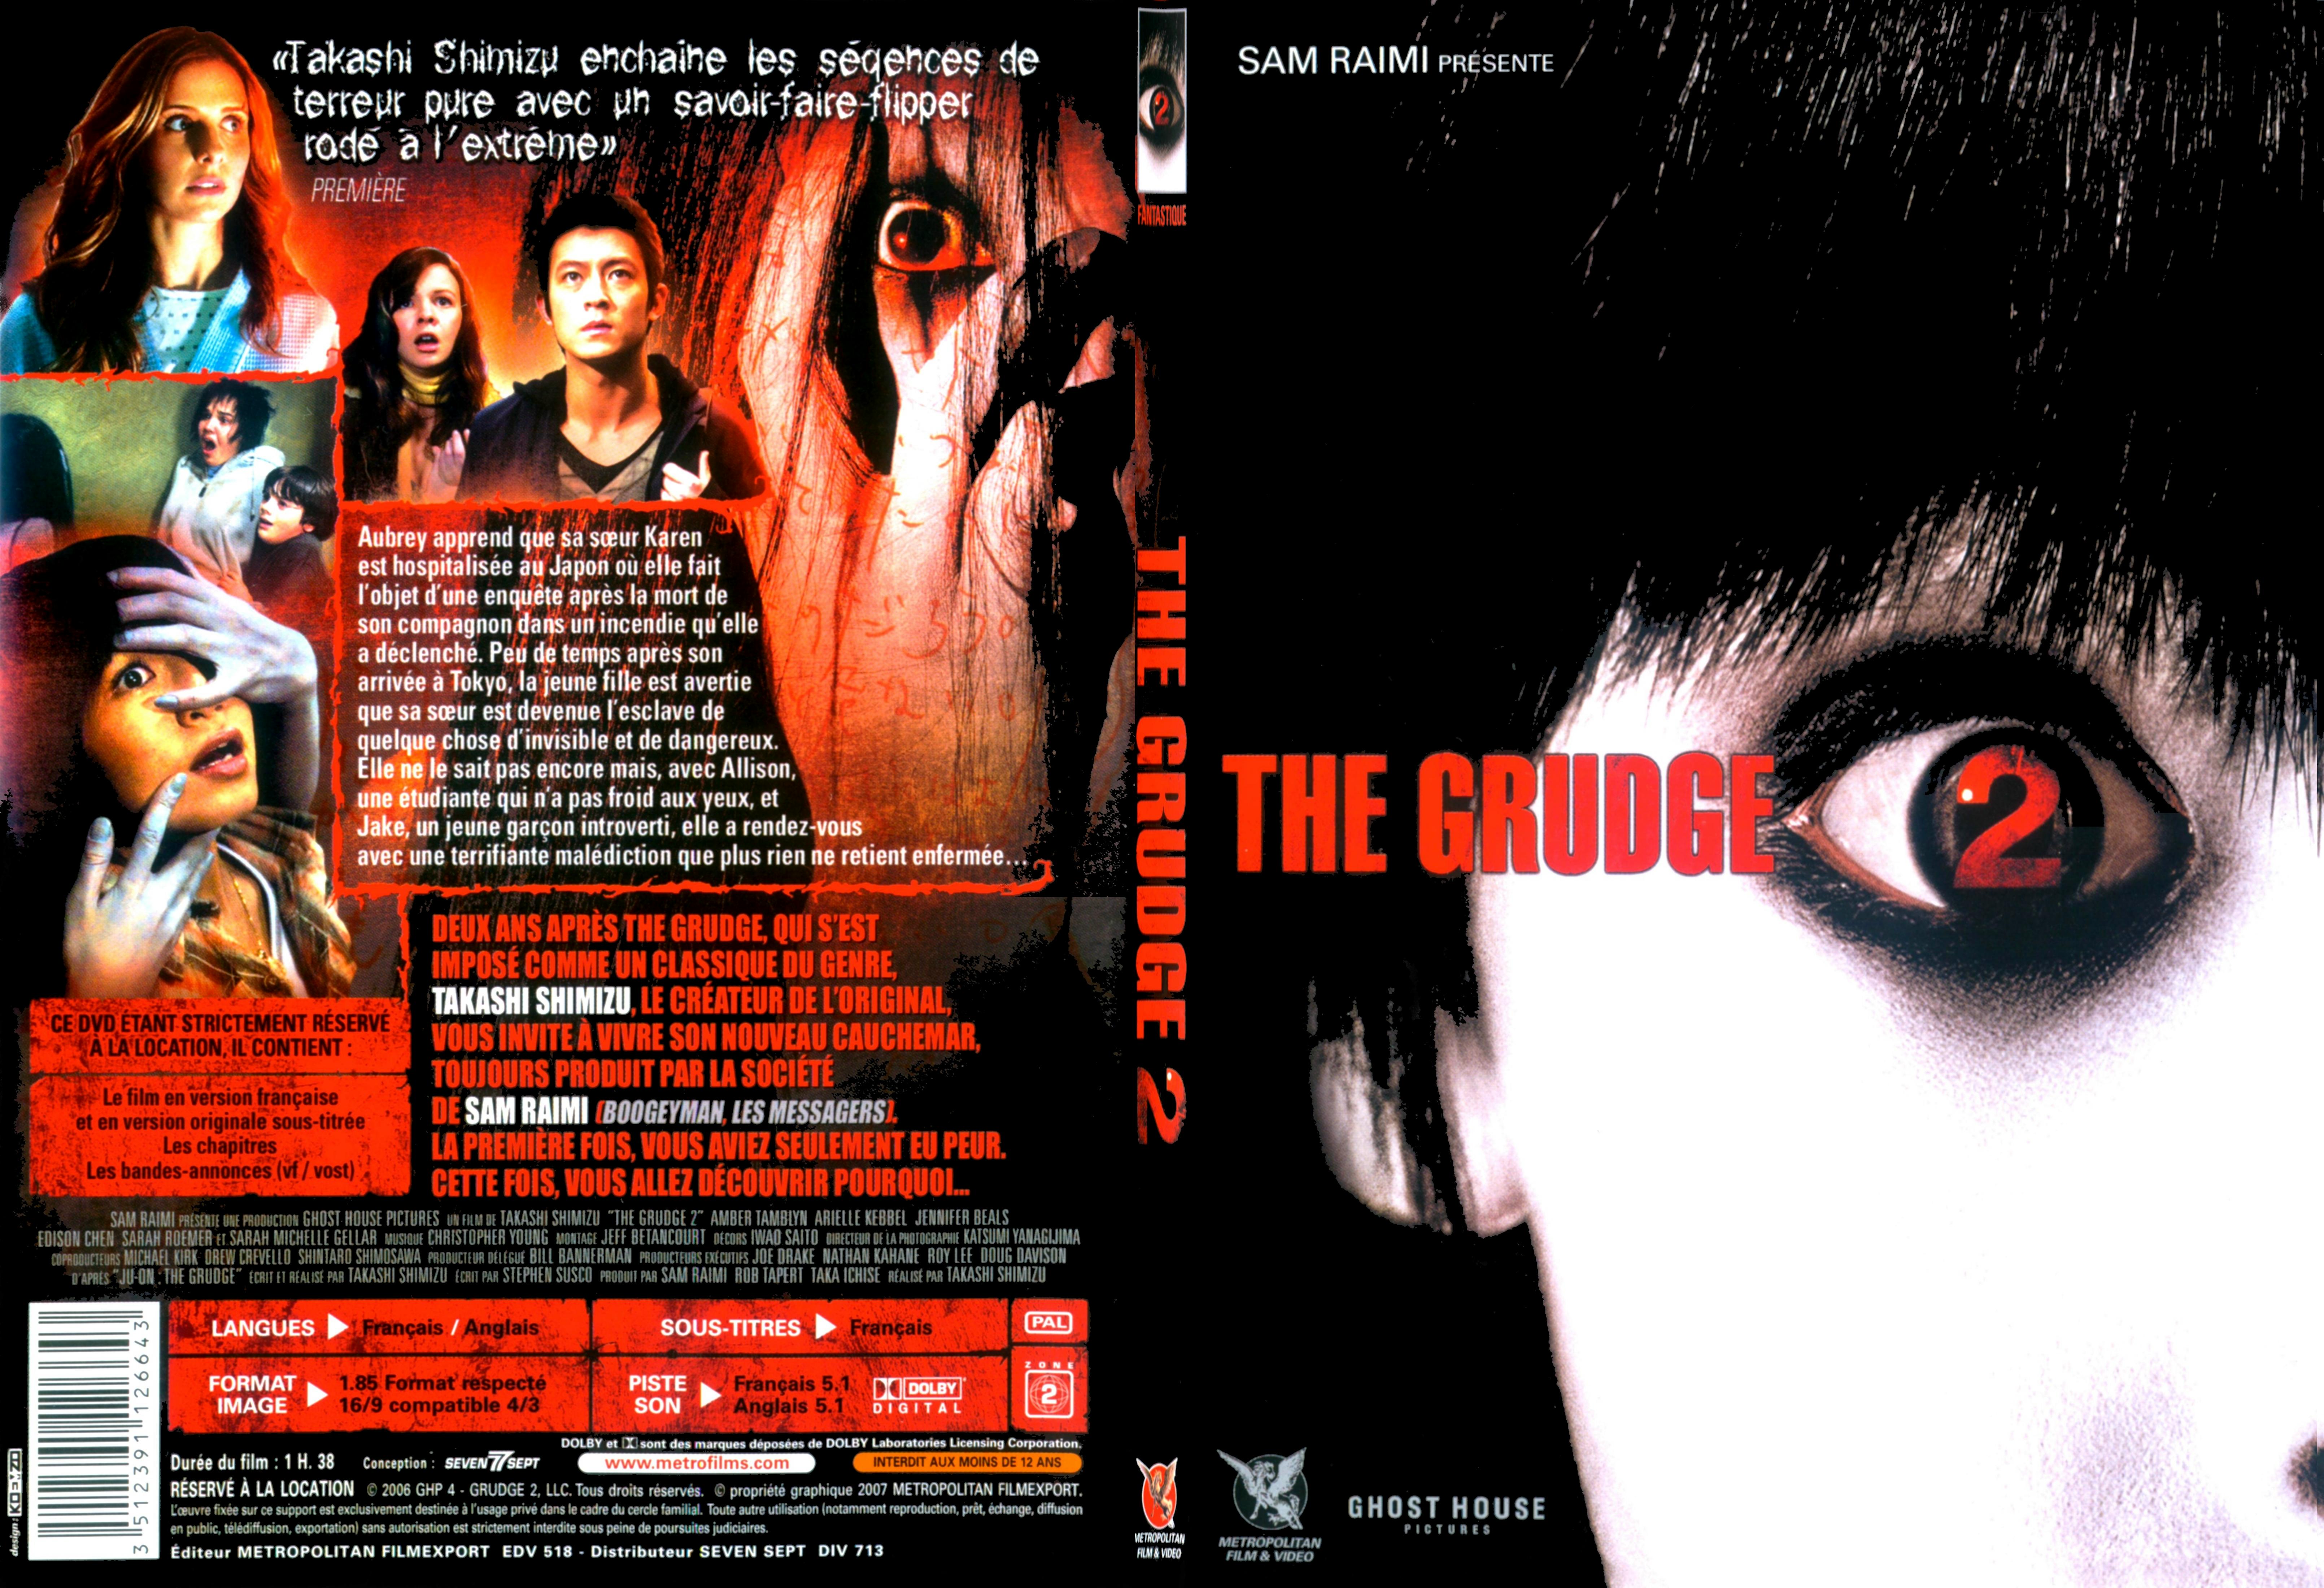 Jaquette DVD The Grudge 2 - SLIM